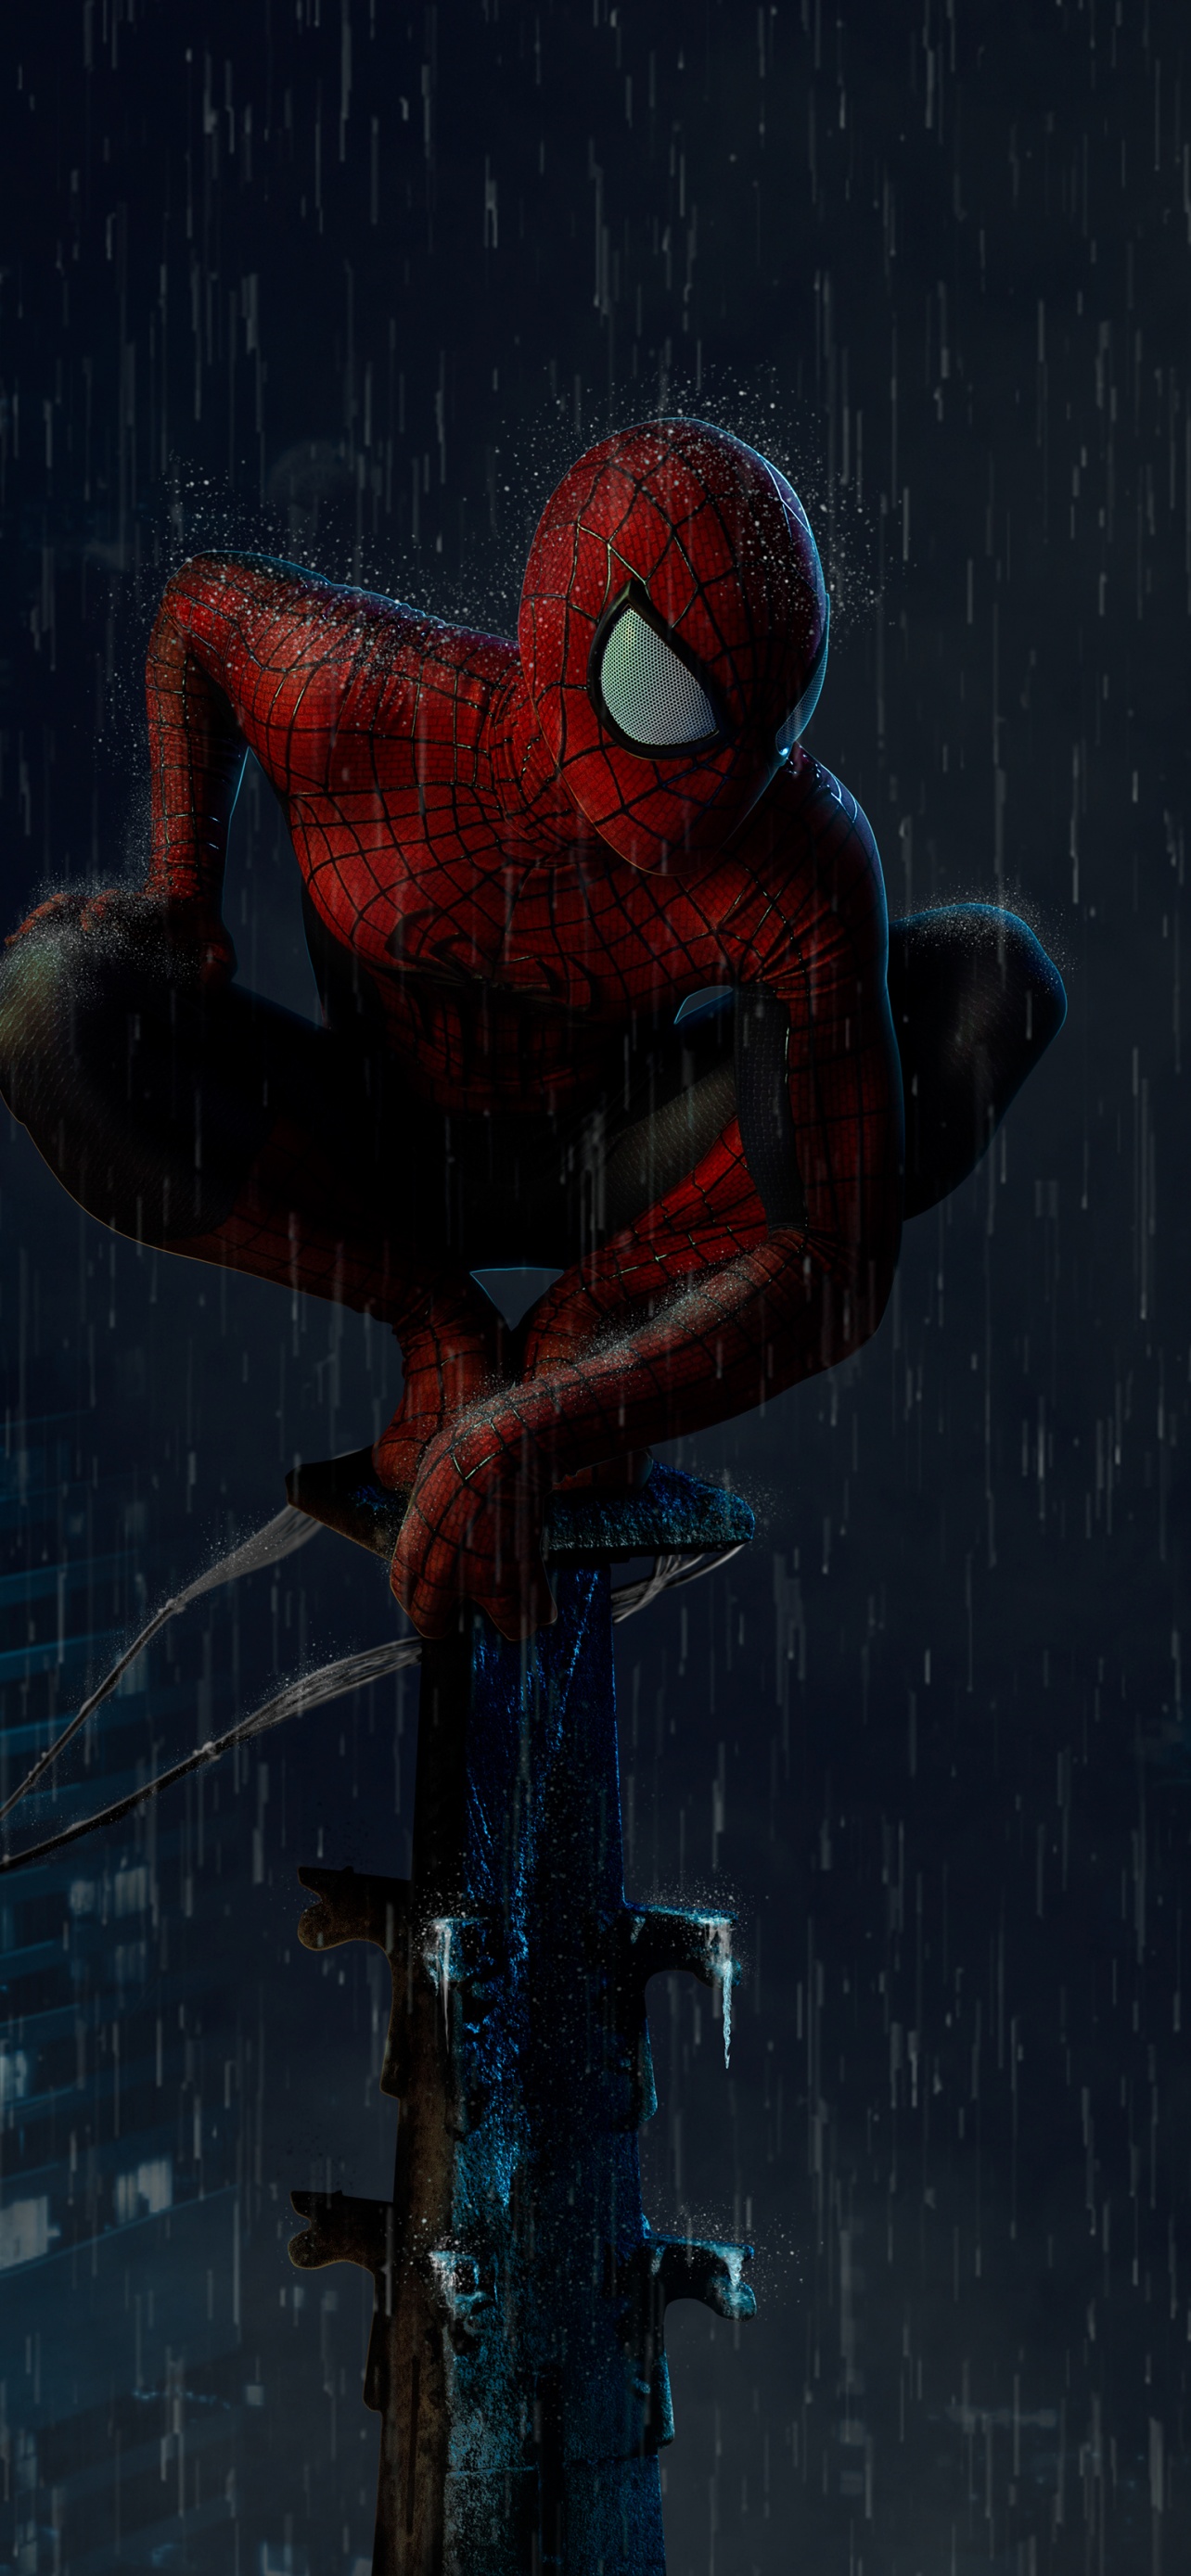 About Spider Man Home Coming HD Wallpaper Lock Screen Google Play  version   Apptopia